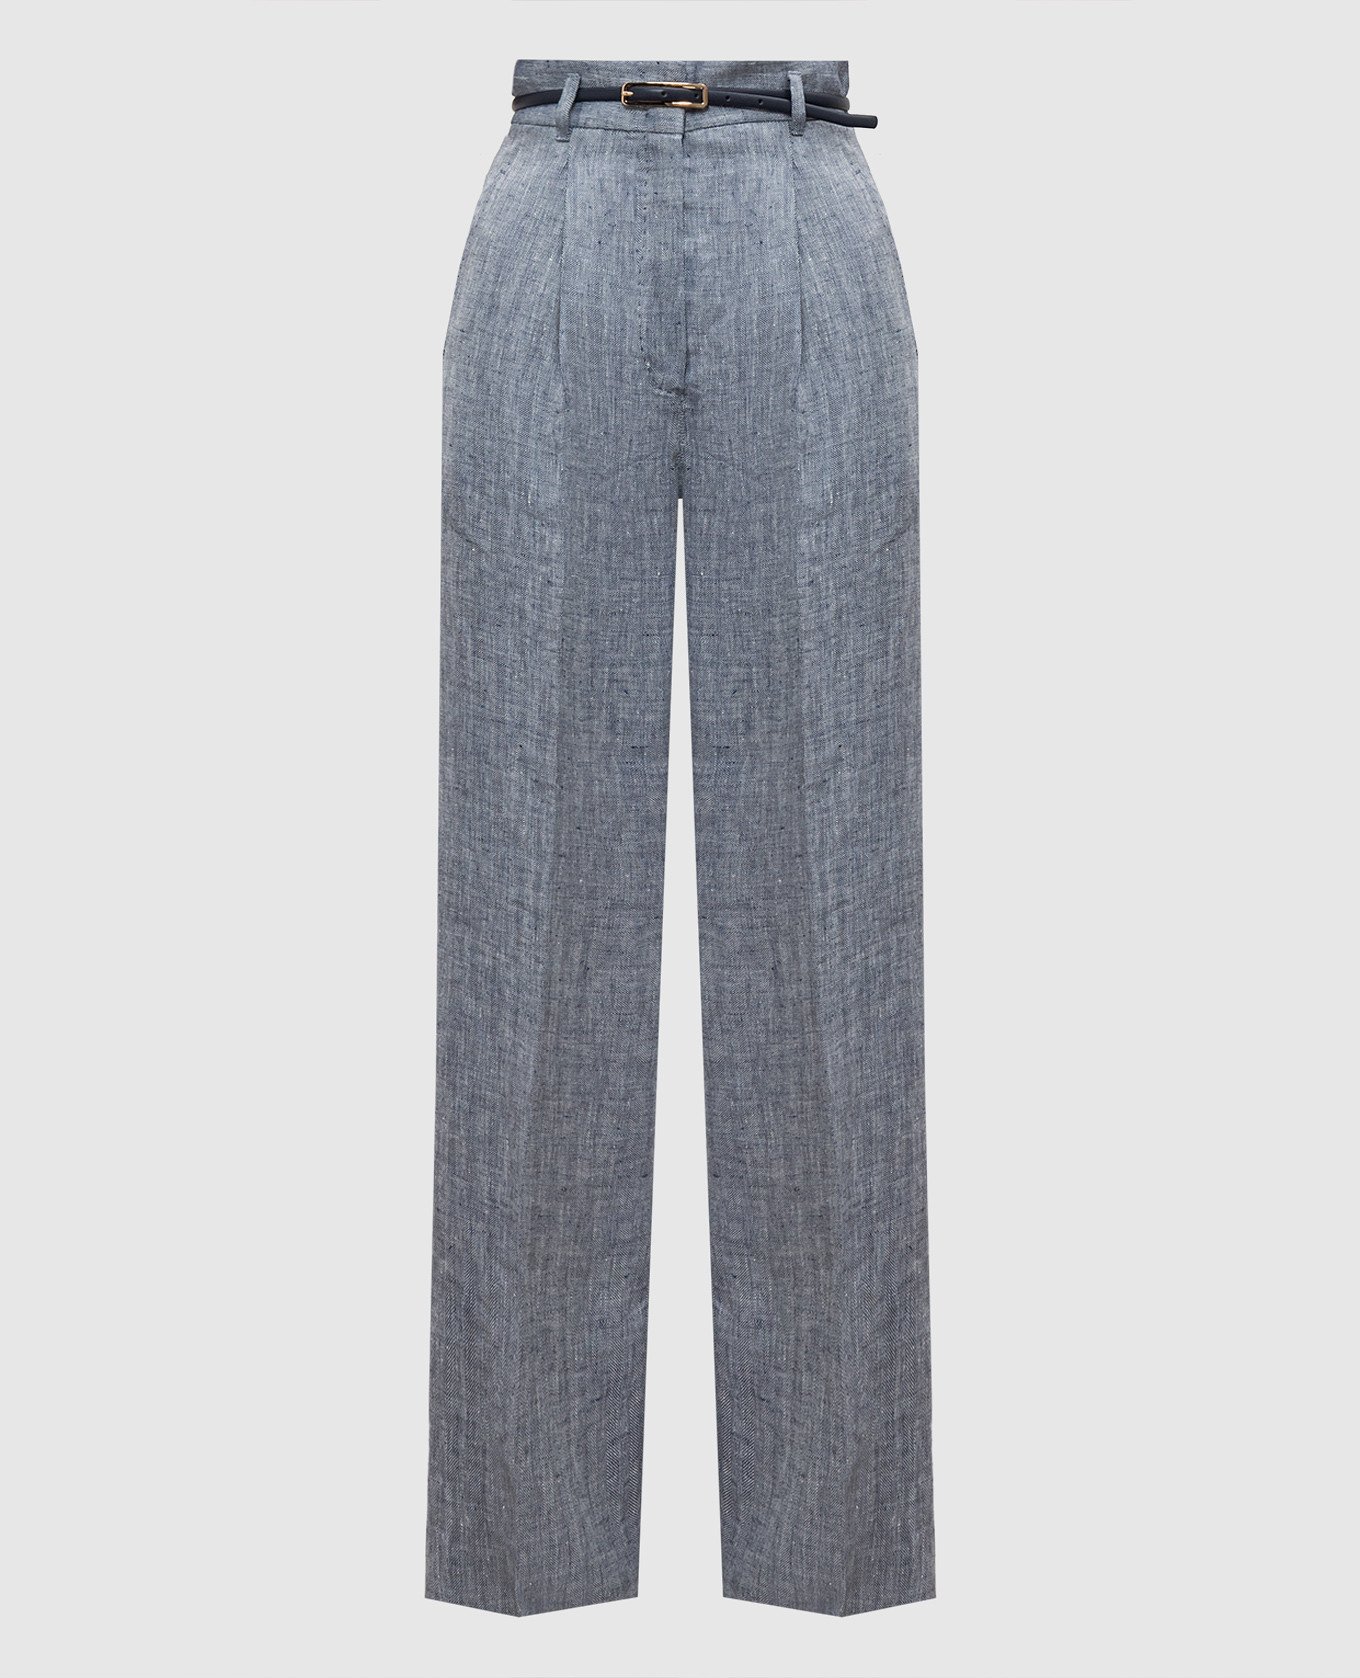 TREVISO blue high rise linen trousers